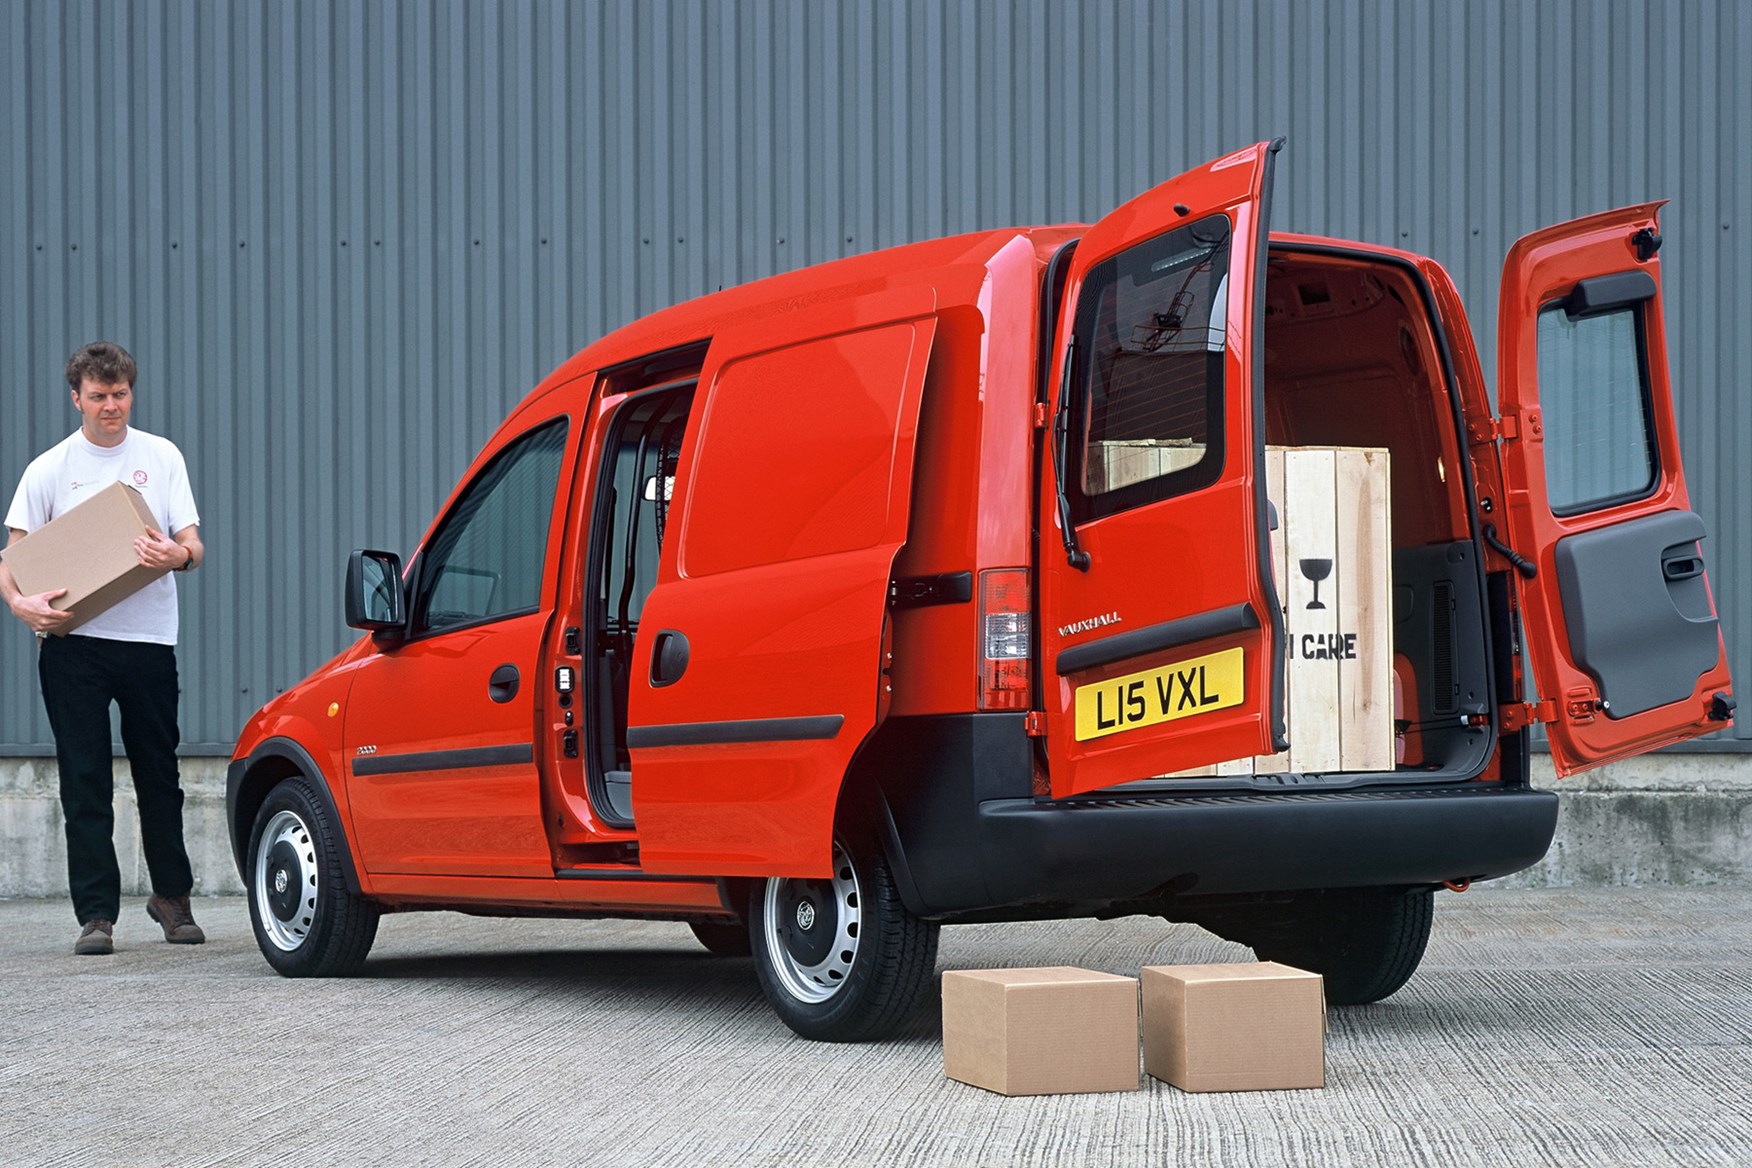 Vauxhall Combo review on Parkers Vans - load area dimensions